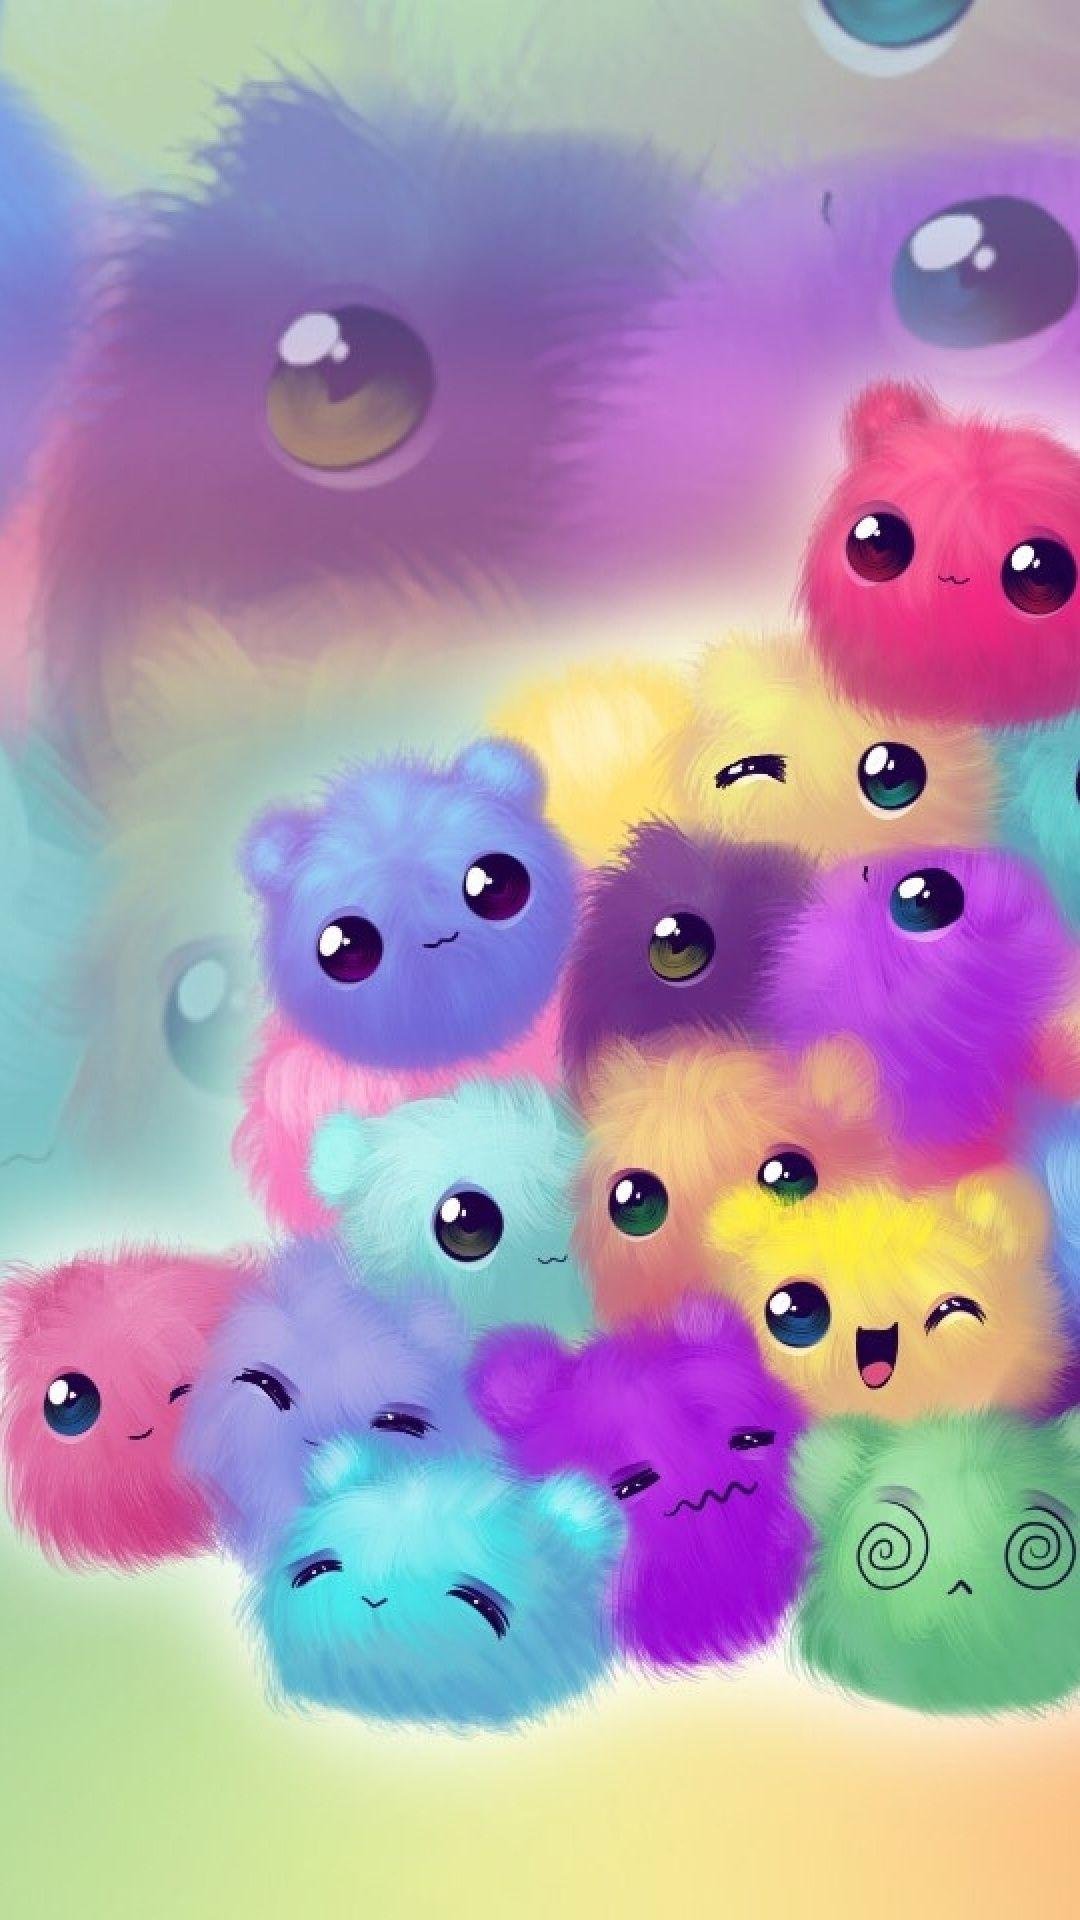 60 Cute Wallpapers for Your Iphone to Download for Free - Everything Abode